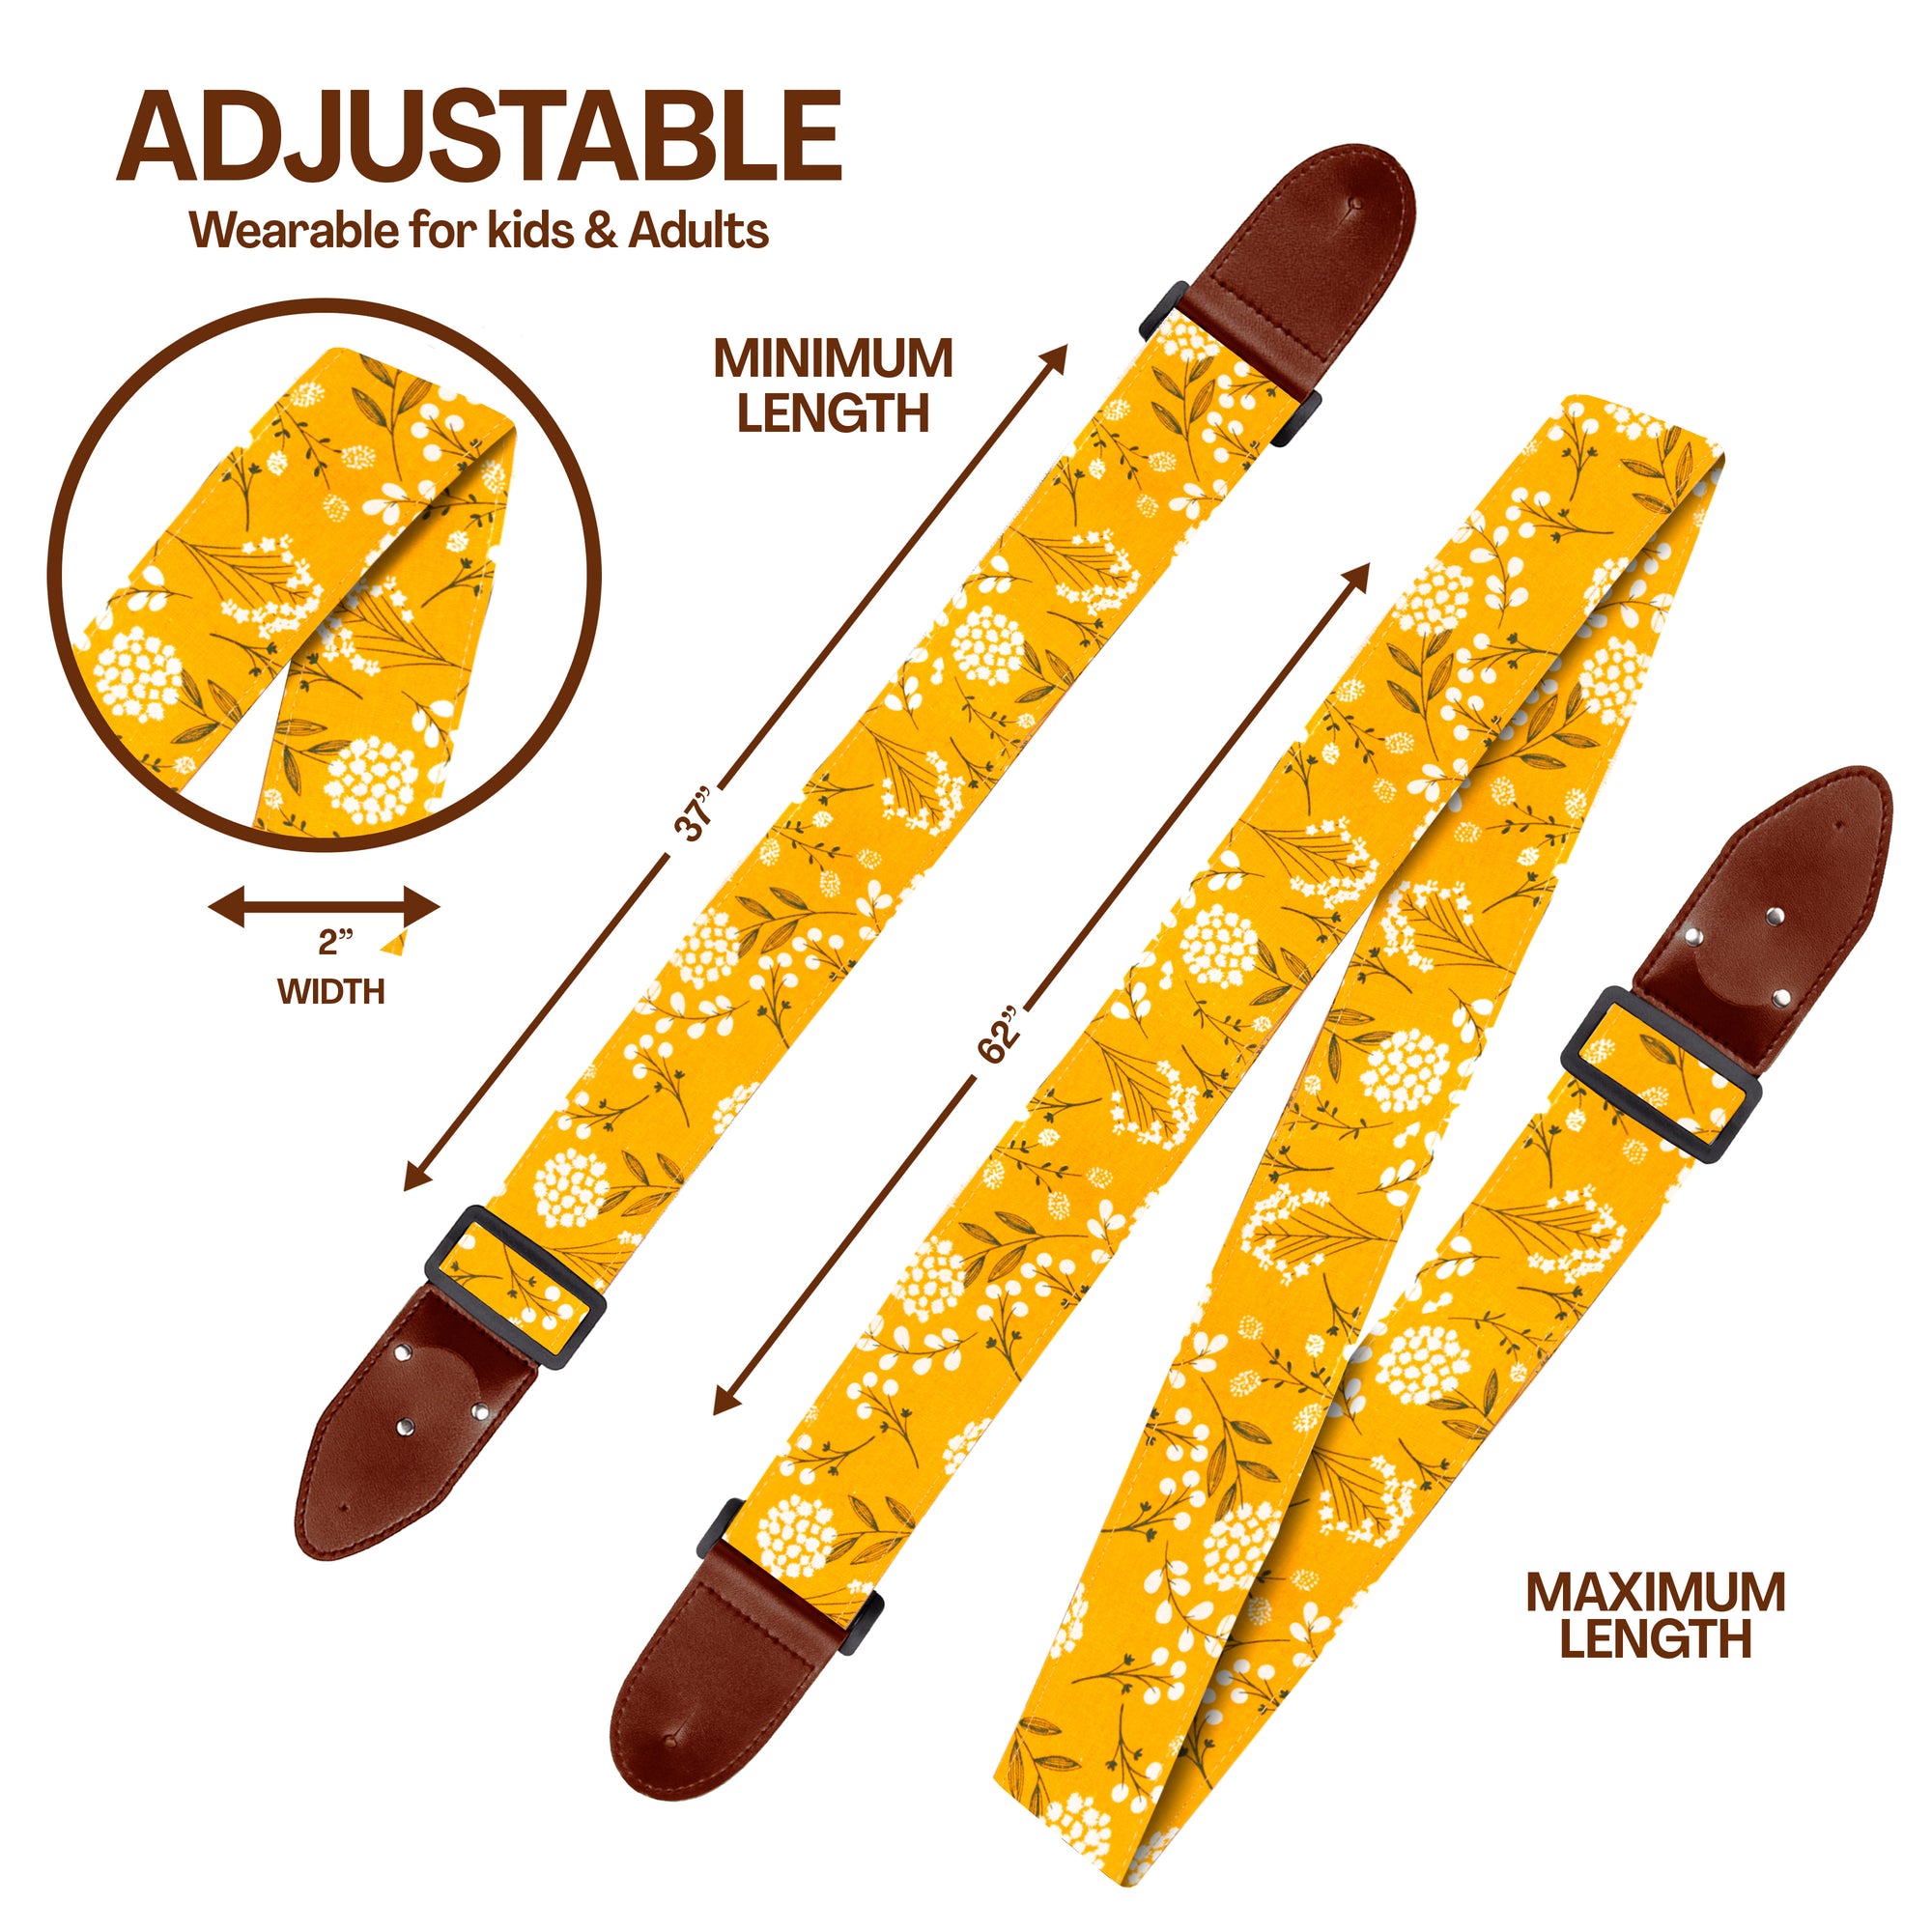 The DANDELION Guitar Strap - Adjustable Guitar Strap for Acoustic, Electric and Bass Guitar